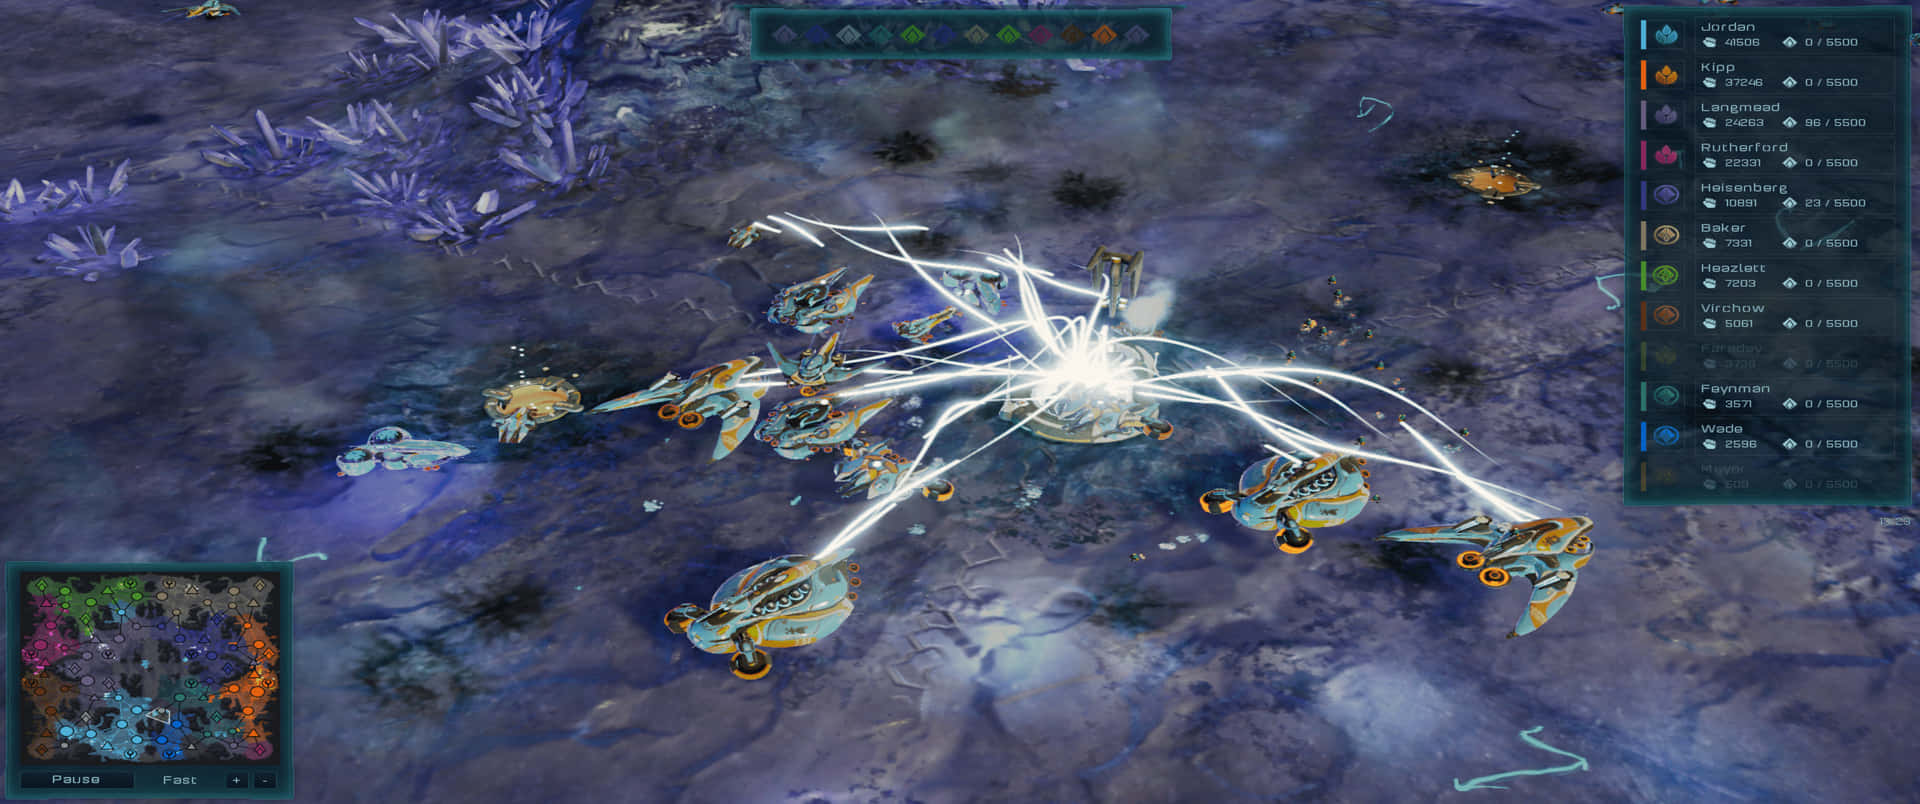 Explore an intense sci-fi universe in Ashes of the Singularity: Escalation